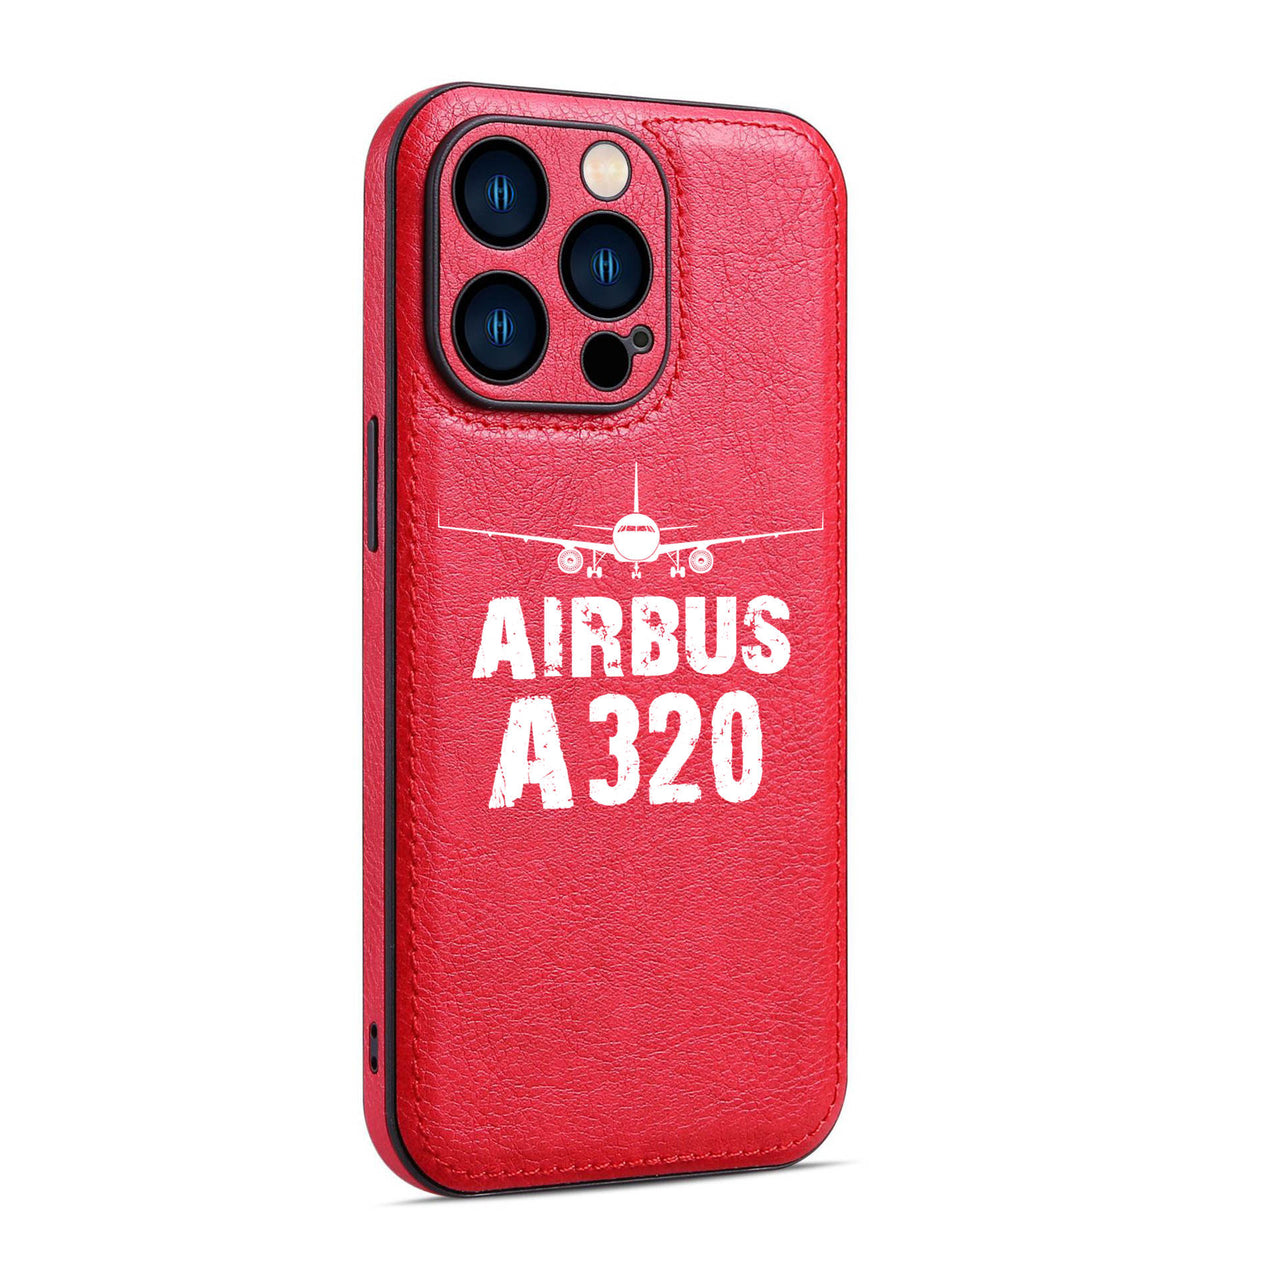 Airbus A320 & Plane Designed Leather iPhone Cases